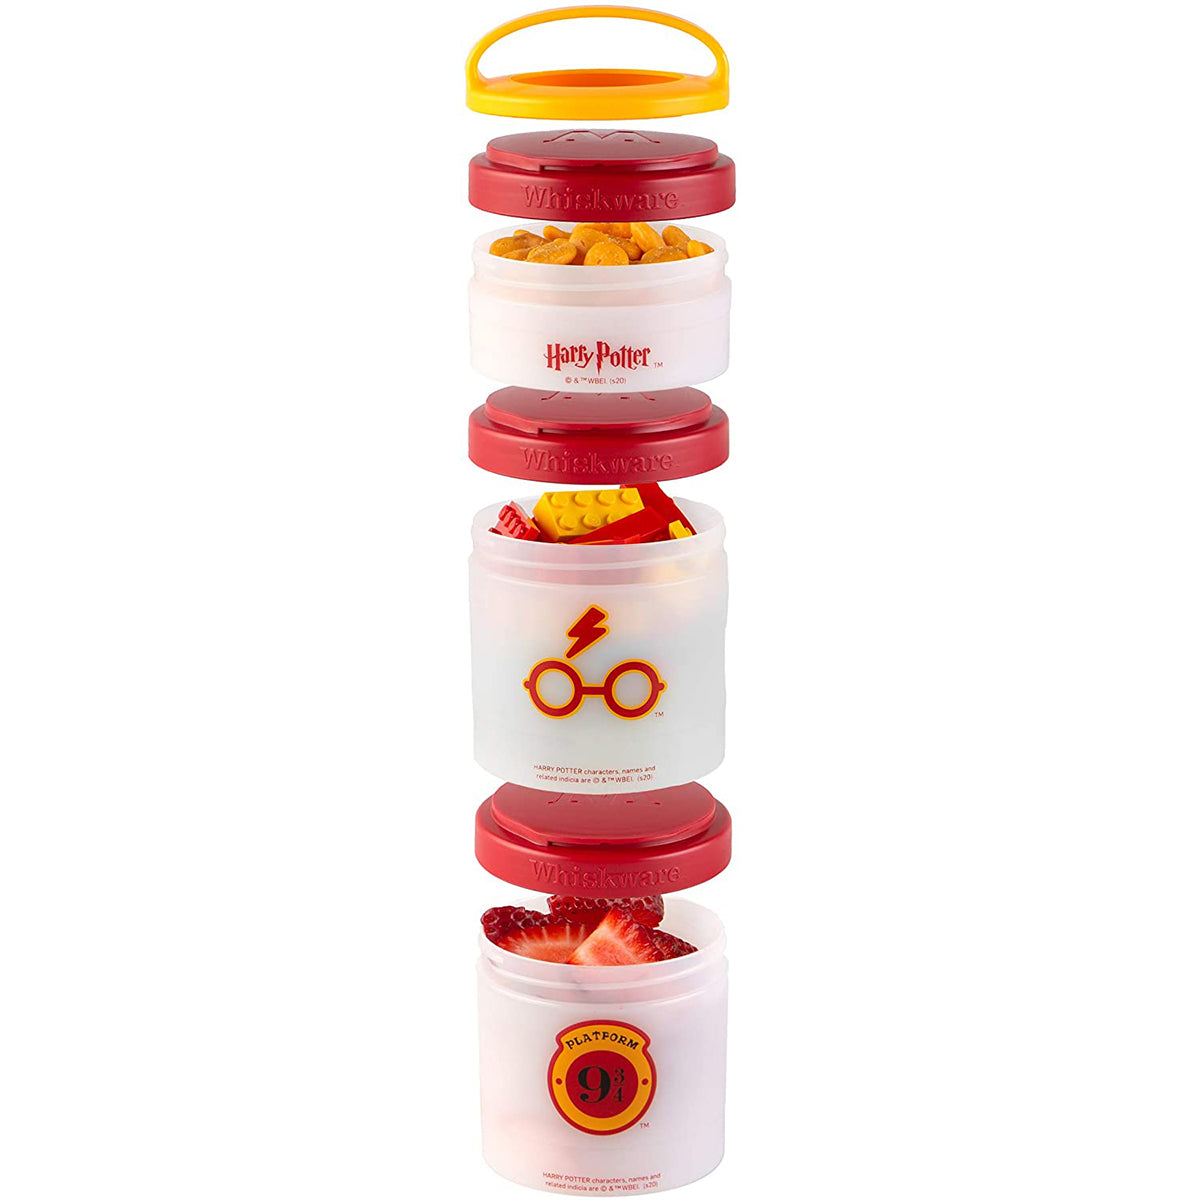 Whiskware Harry Potter Stackable Snack Pack Containers Whiskware